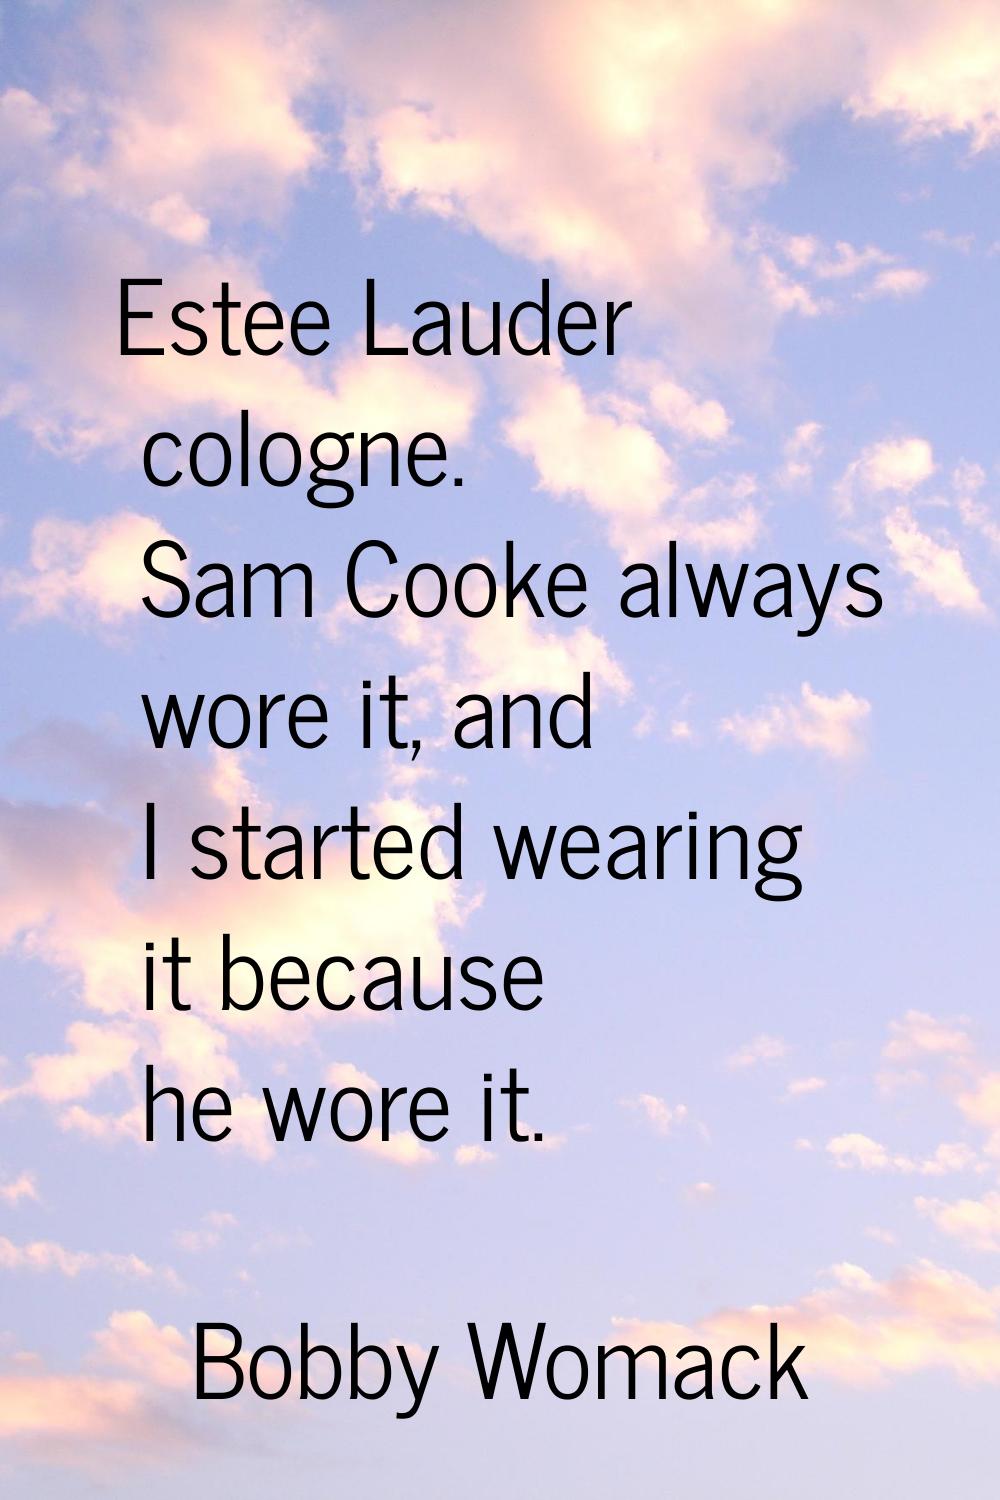 Estee Lauder cologne. Sam Cooke always wore it, and I started wearing it because he wore it.